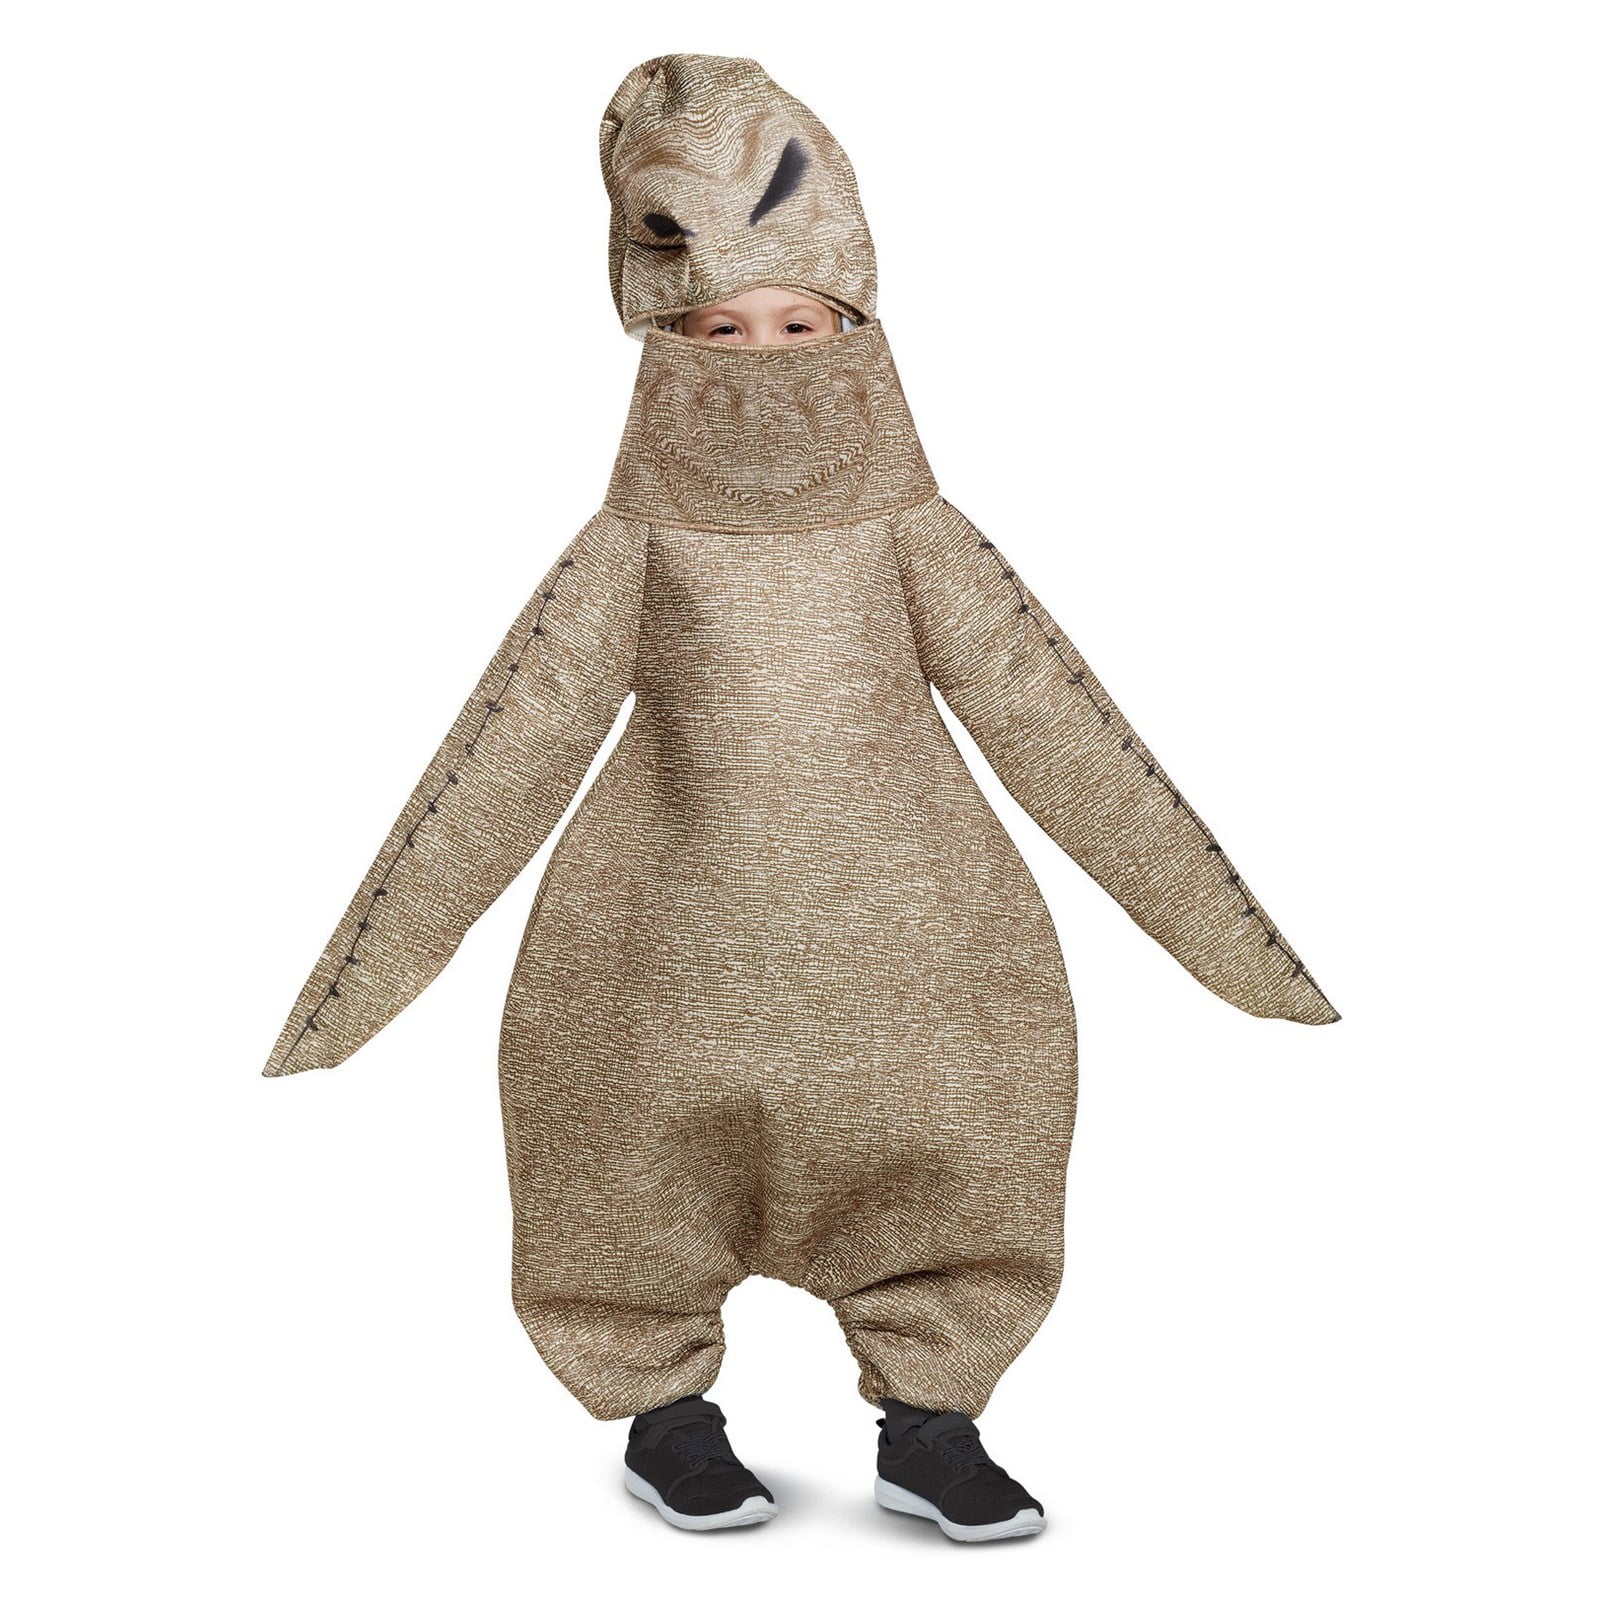 Oogie Boogie inspired costume size 12-18 months Ready to ship and the shipping is free!